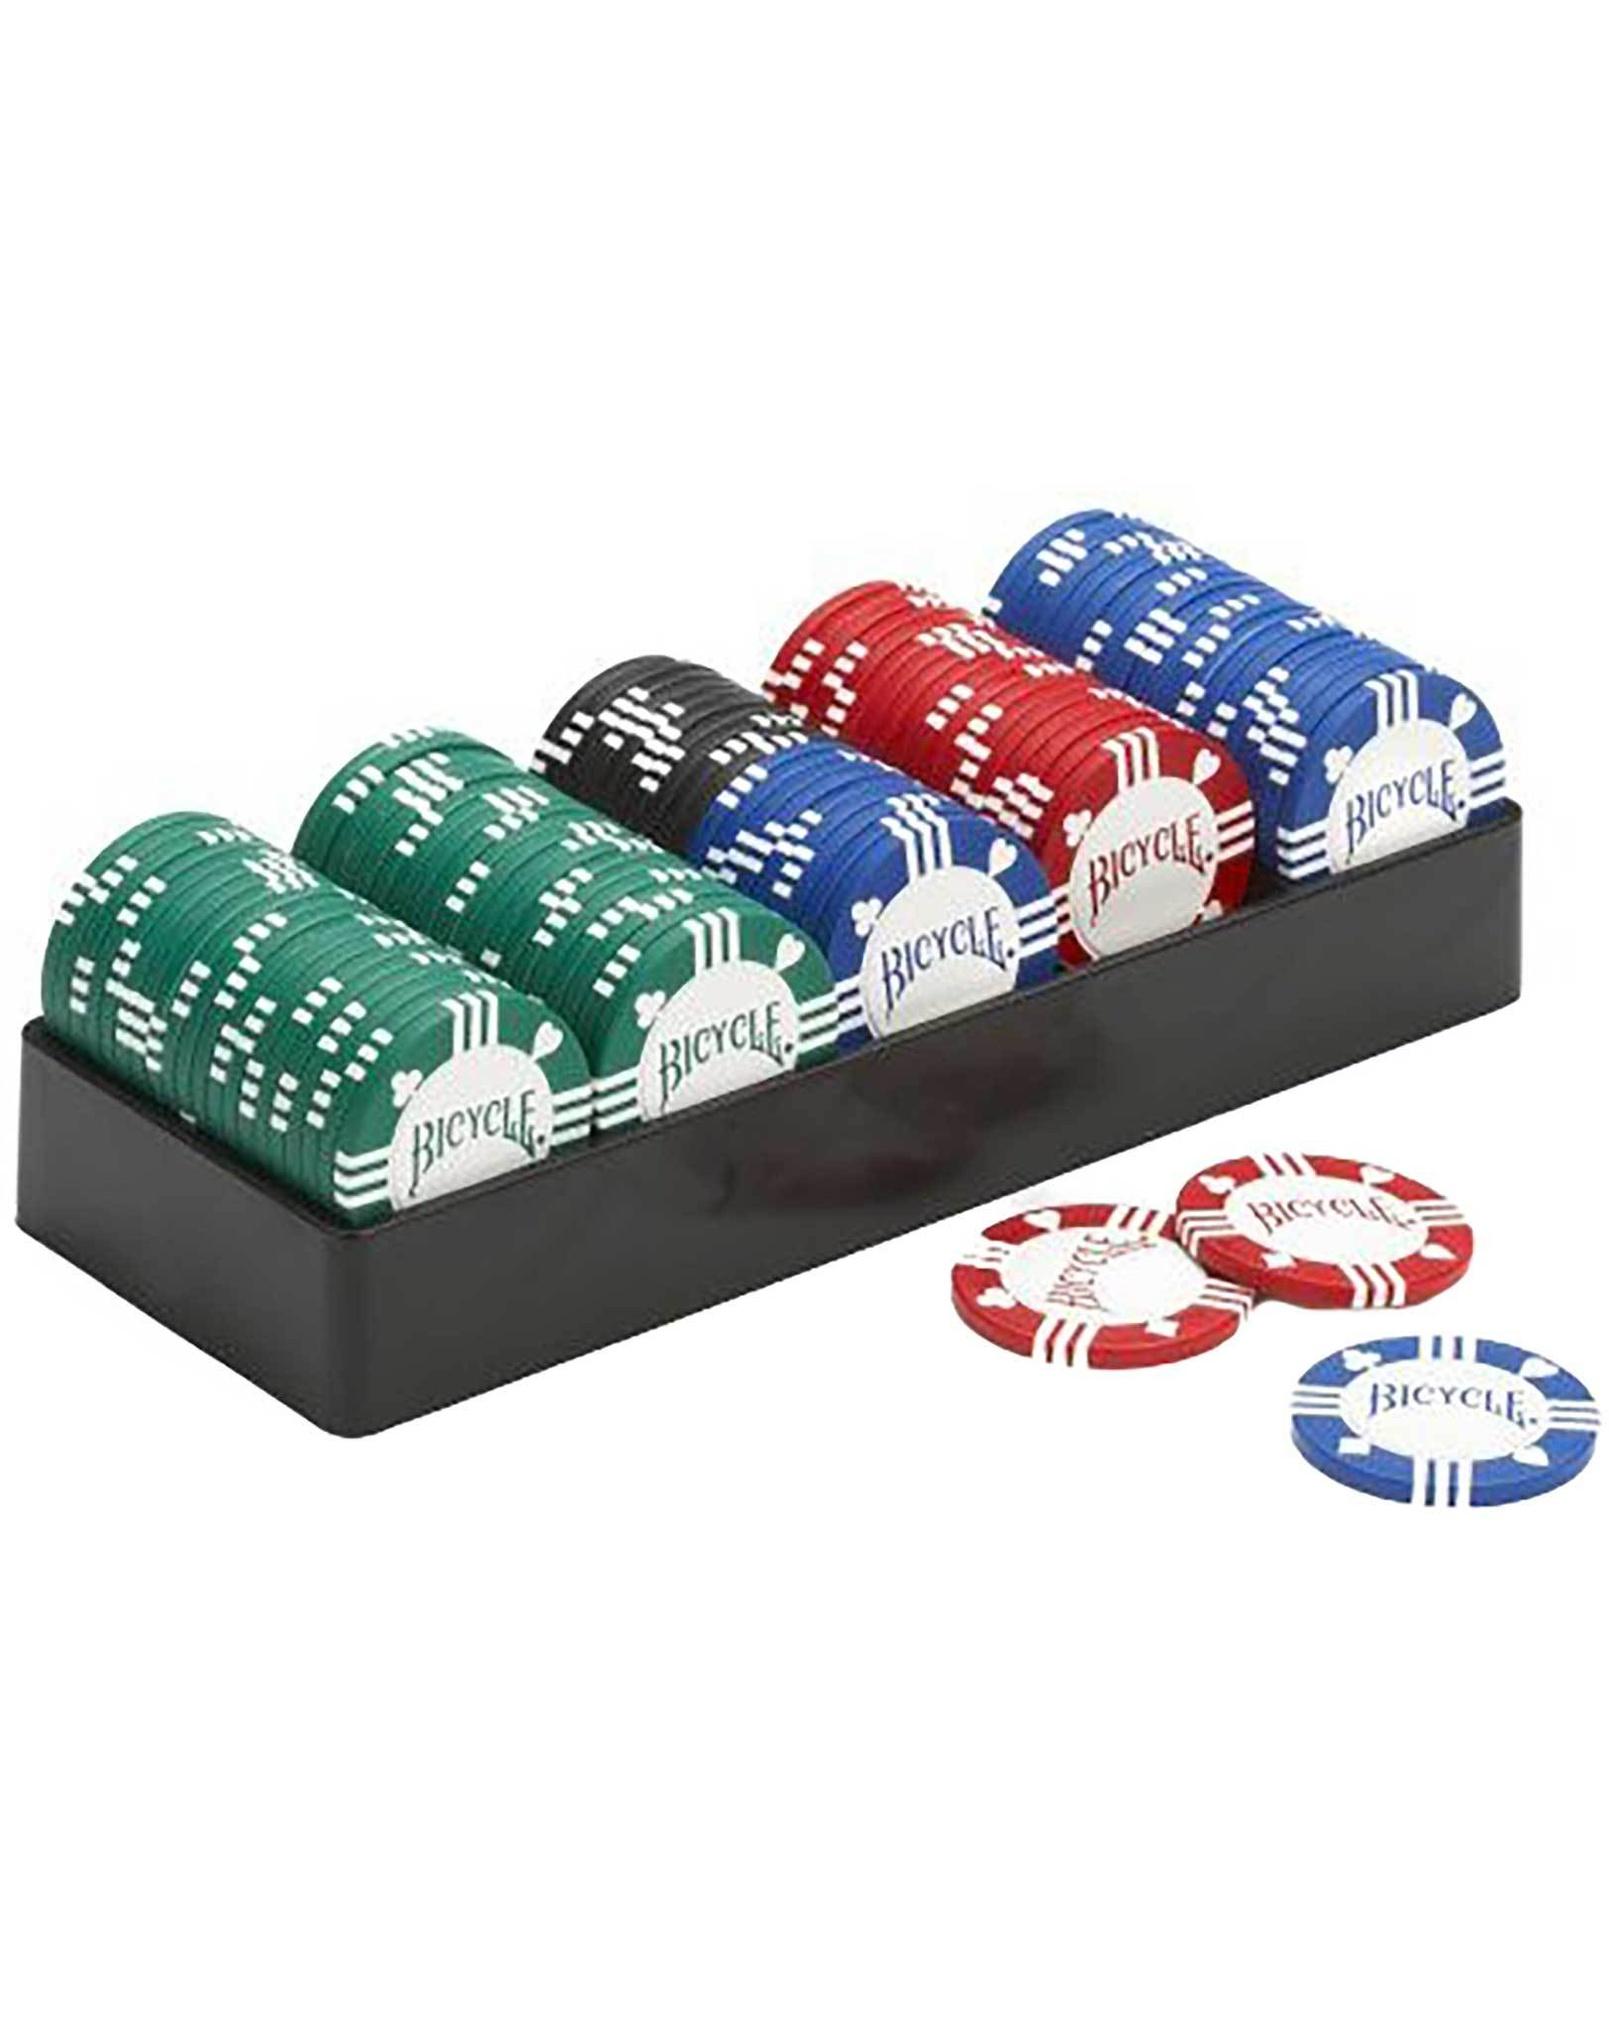 Bicycle - Tournament Quality Poker Chips with Tray